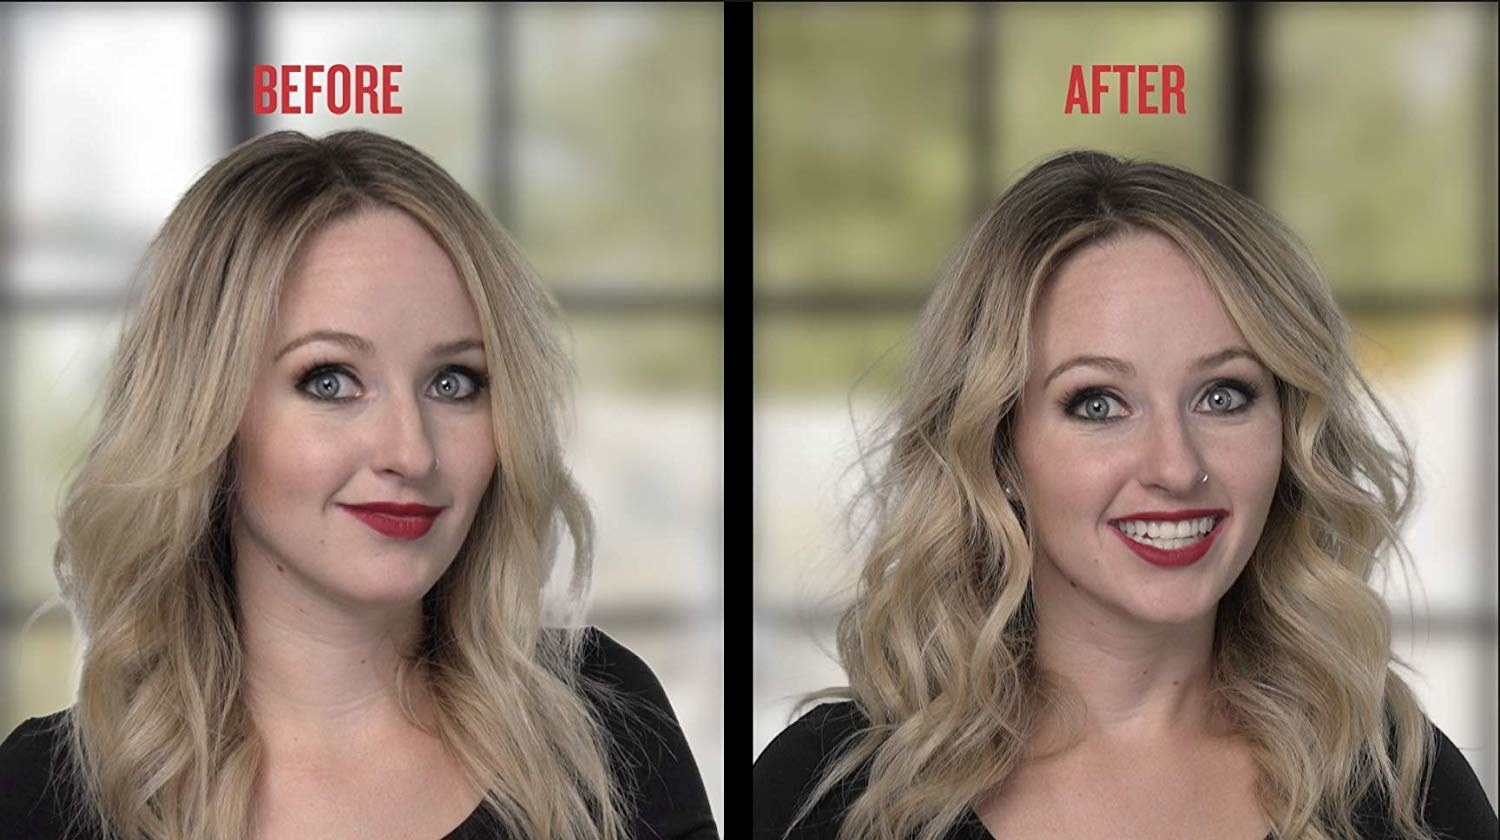 A model before/after with wavy-straight hair before and wavy-curly, voluminous hair after